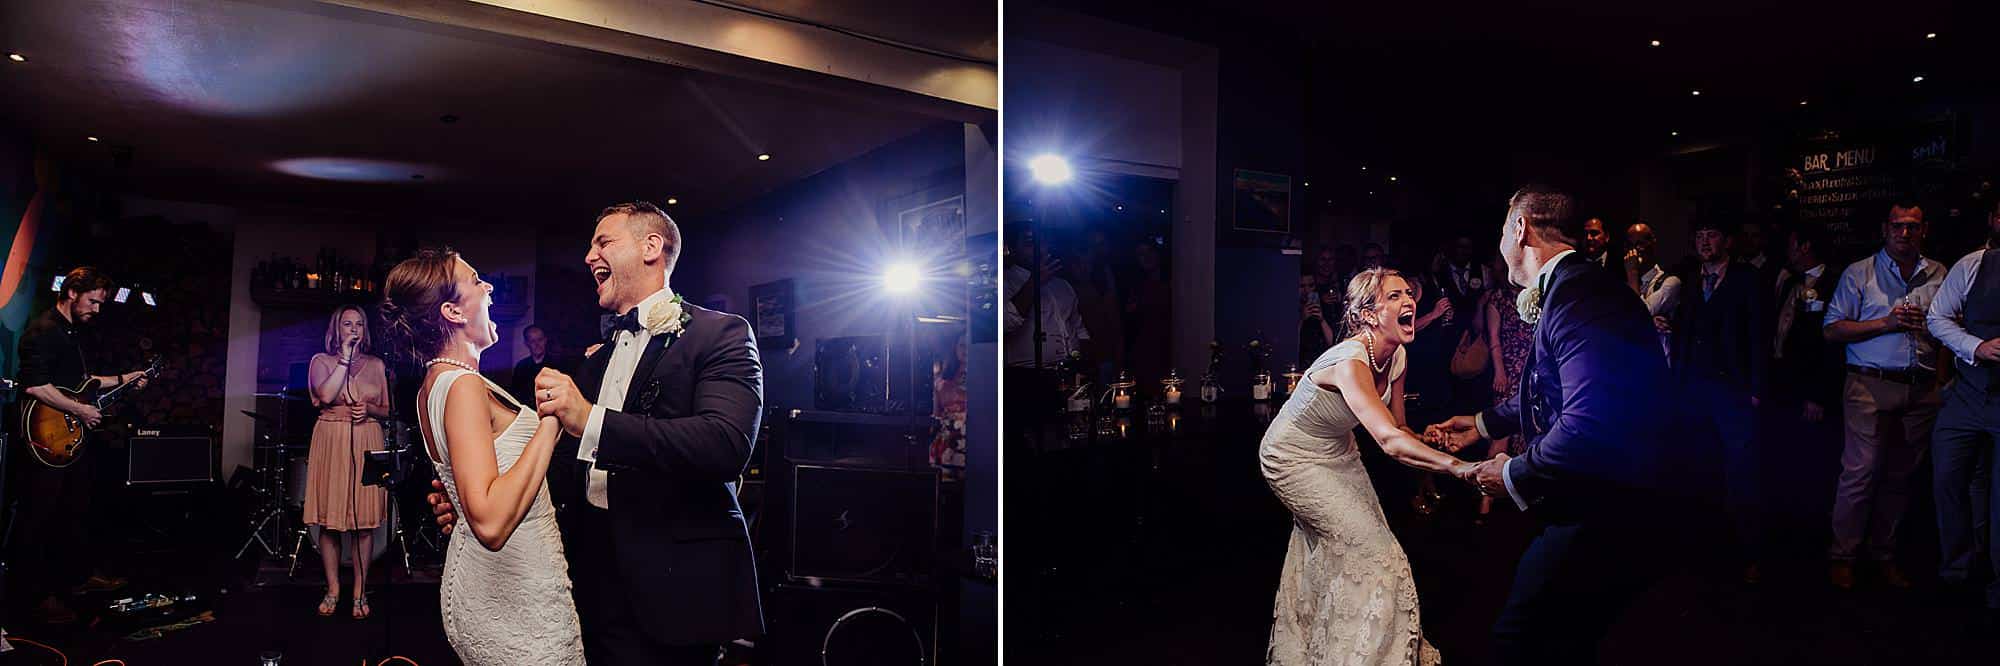 Bride and groom dance to the first song on their wedding day